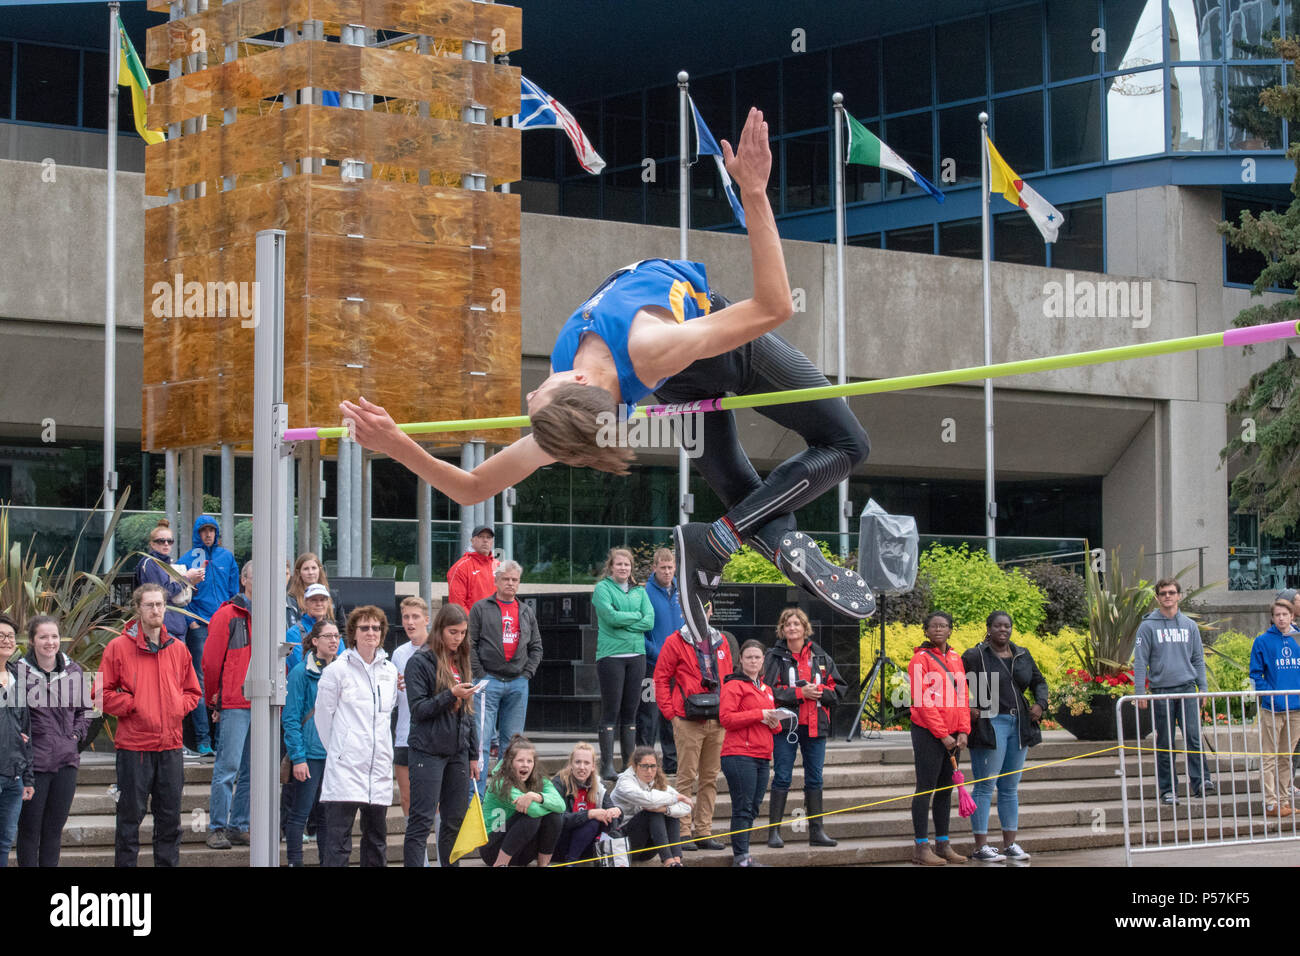 June 23, 2018; Men's High Jump at the Track Takeover, Olympic Plaza, Downtown Calgary, Alberta, Canada. Stock Photo